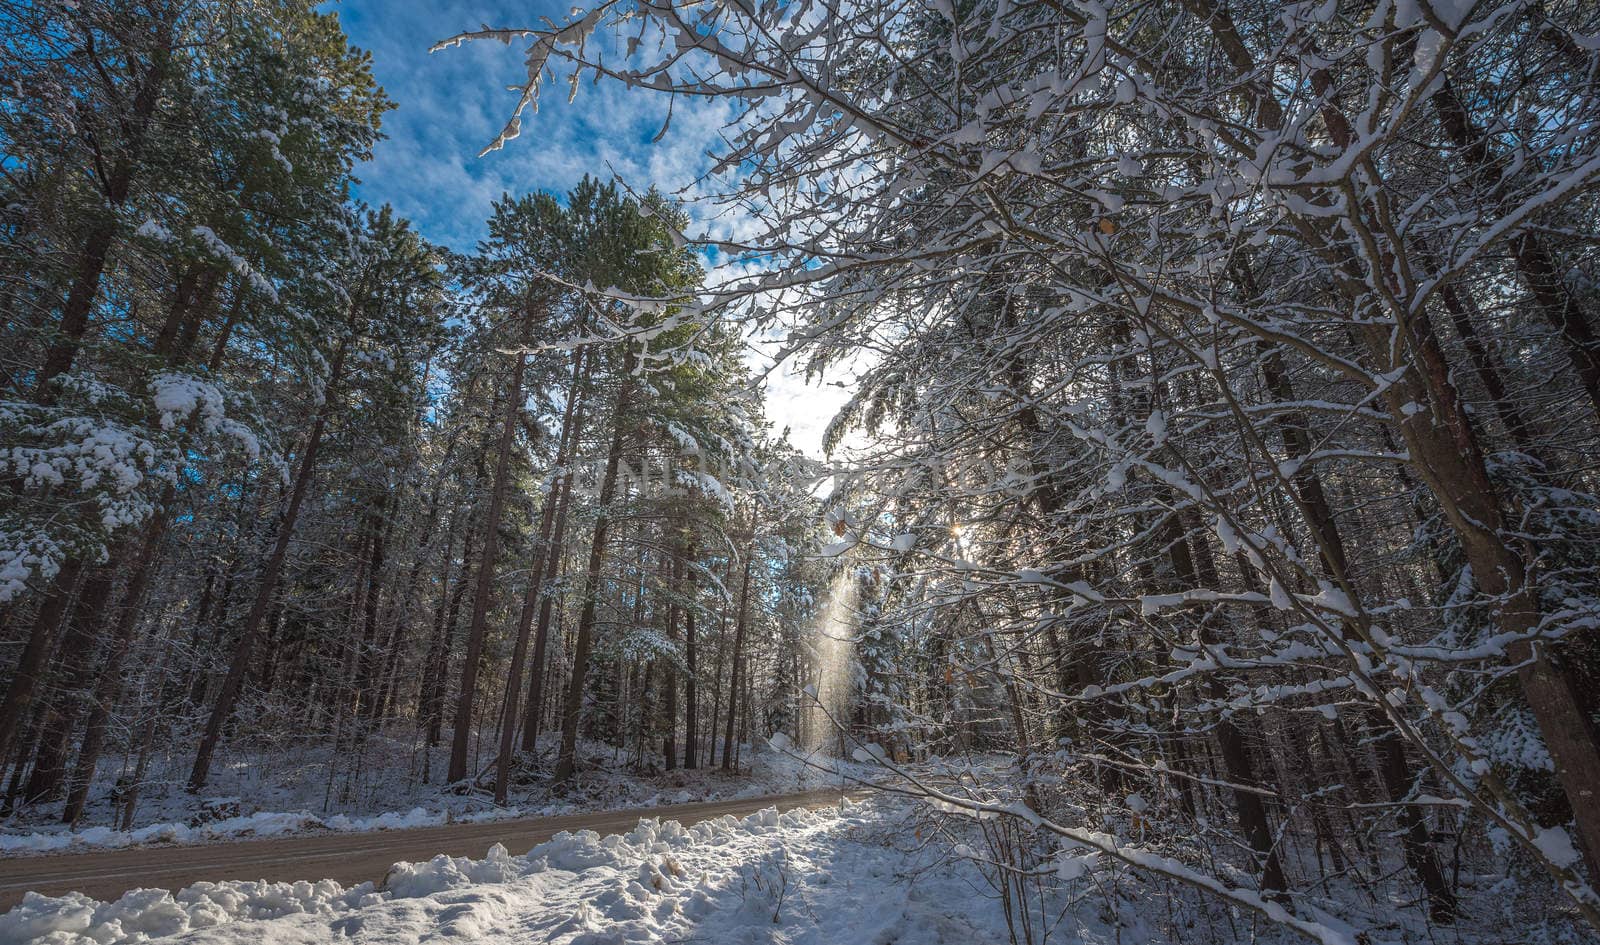 The sun provides a backlit view of snow falling from a branch of a pine tree.  Frosty winter morning, forests draped in frozen snow.